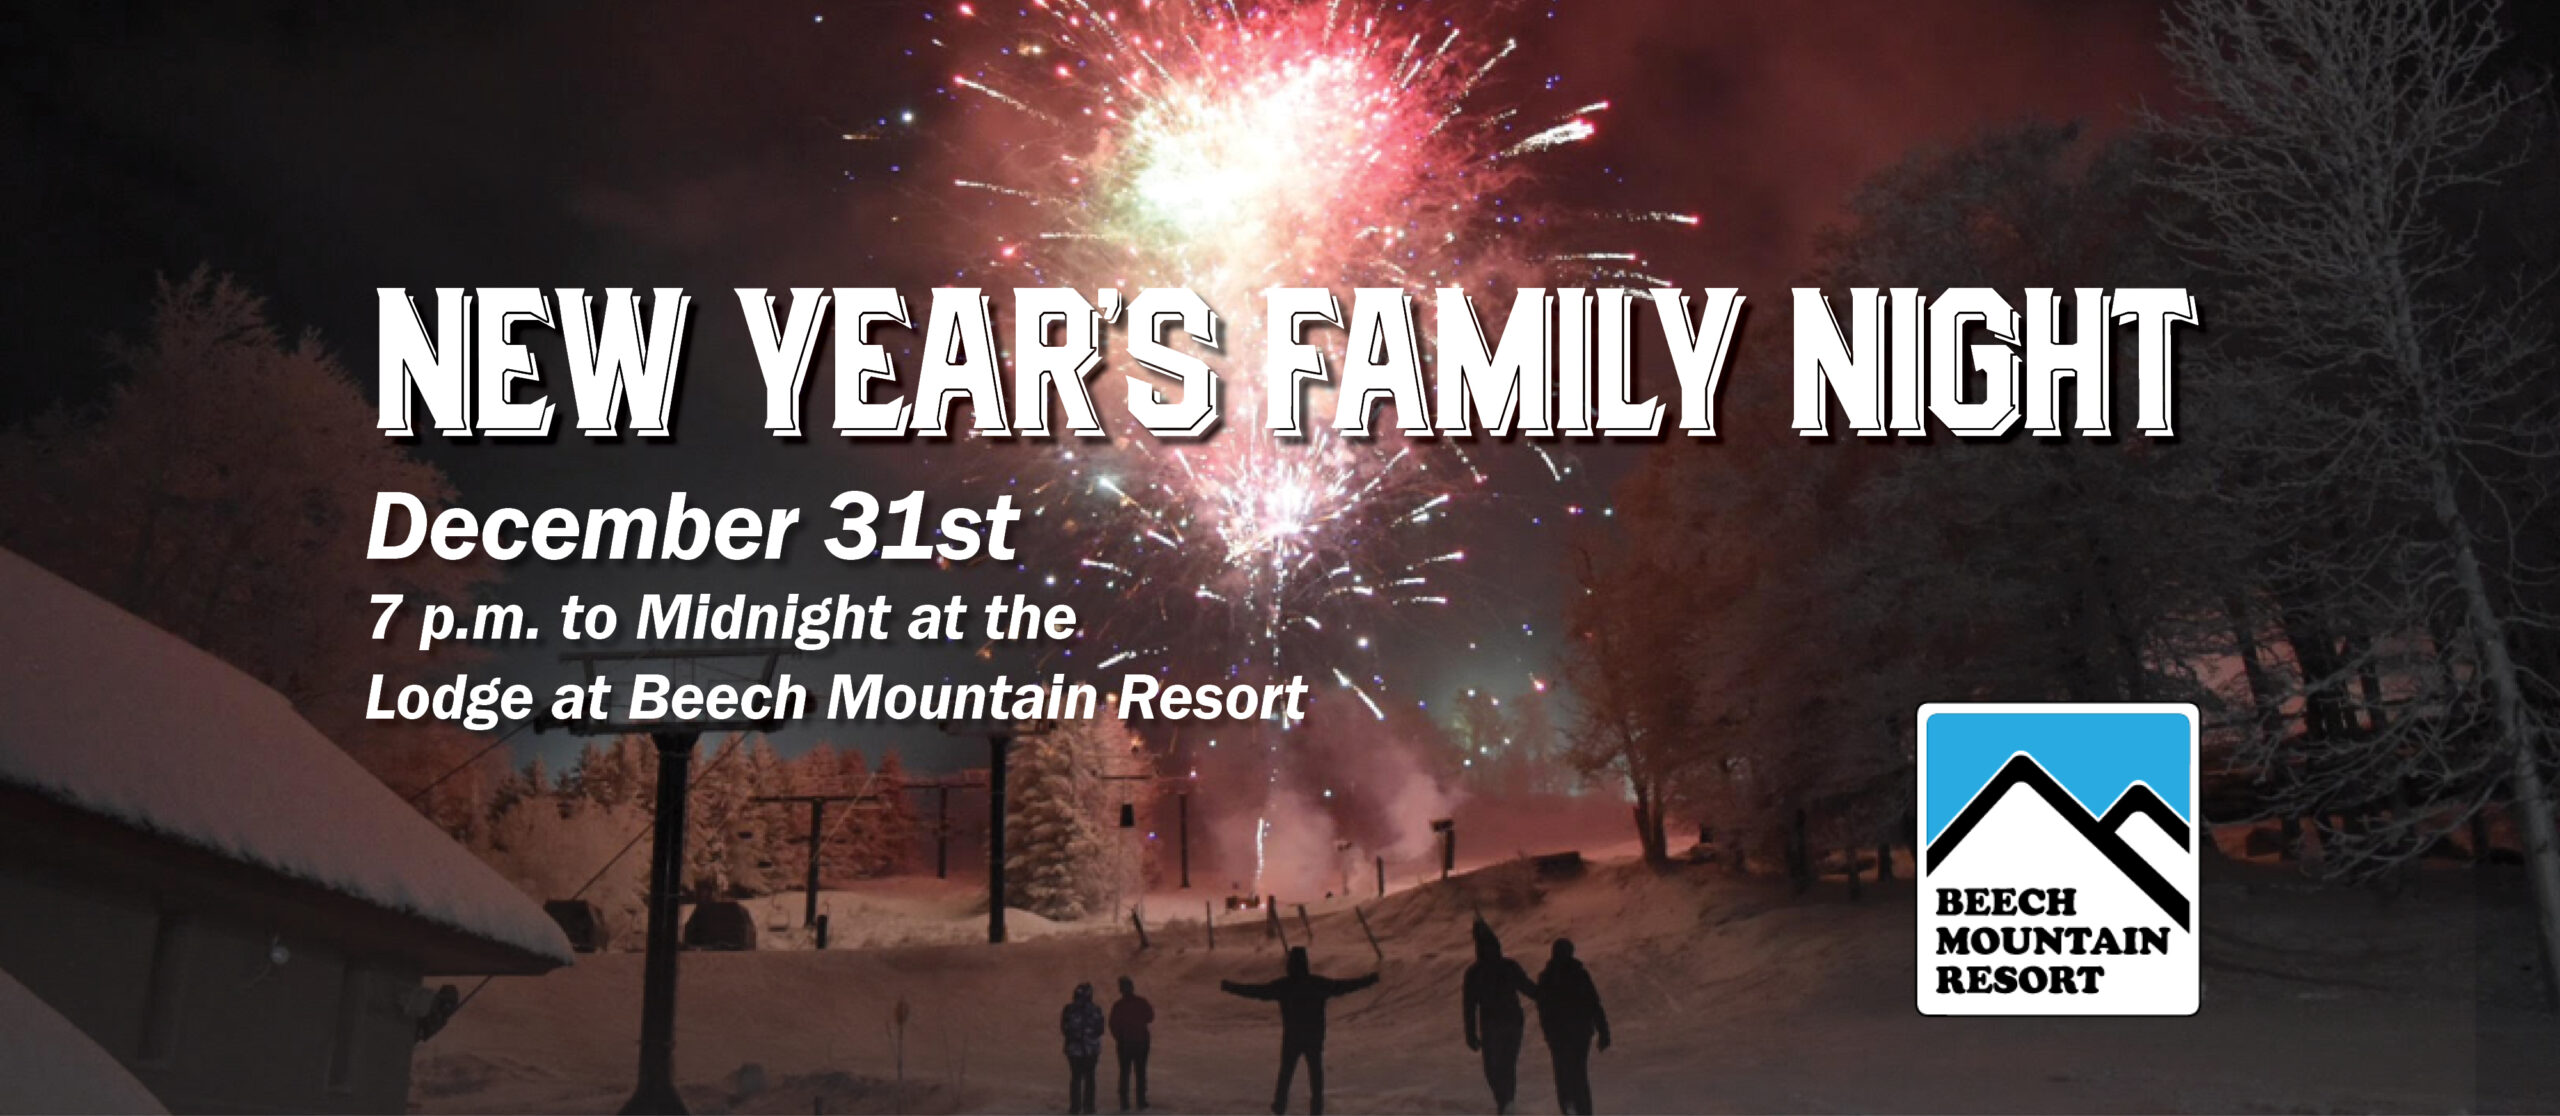 Flyer for family night which includes a picture of fireworks going off on the slopes as people stand below them